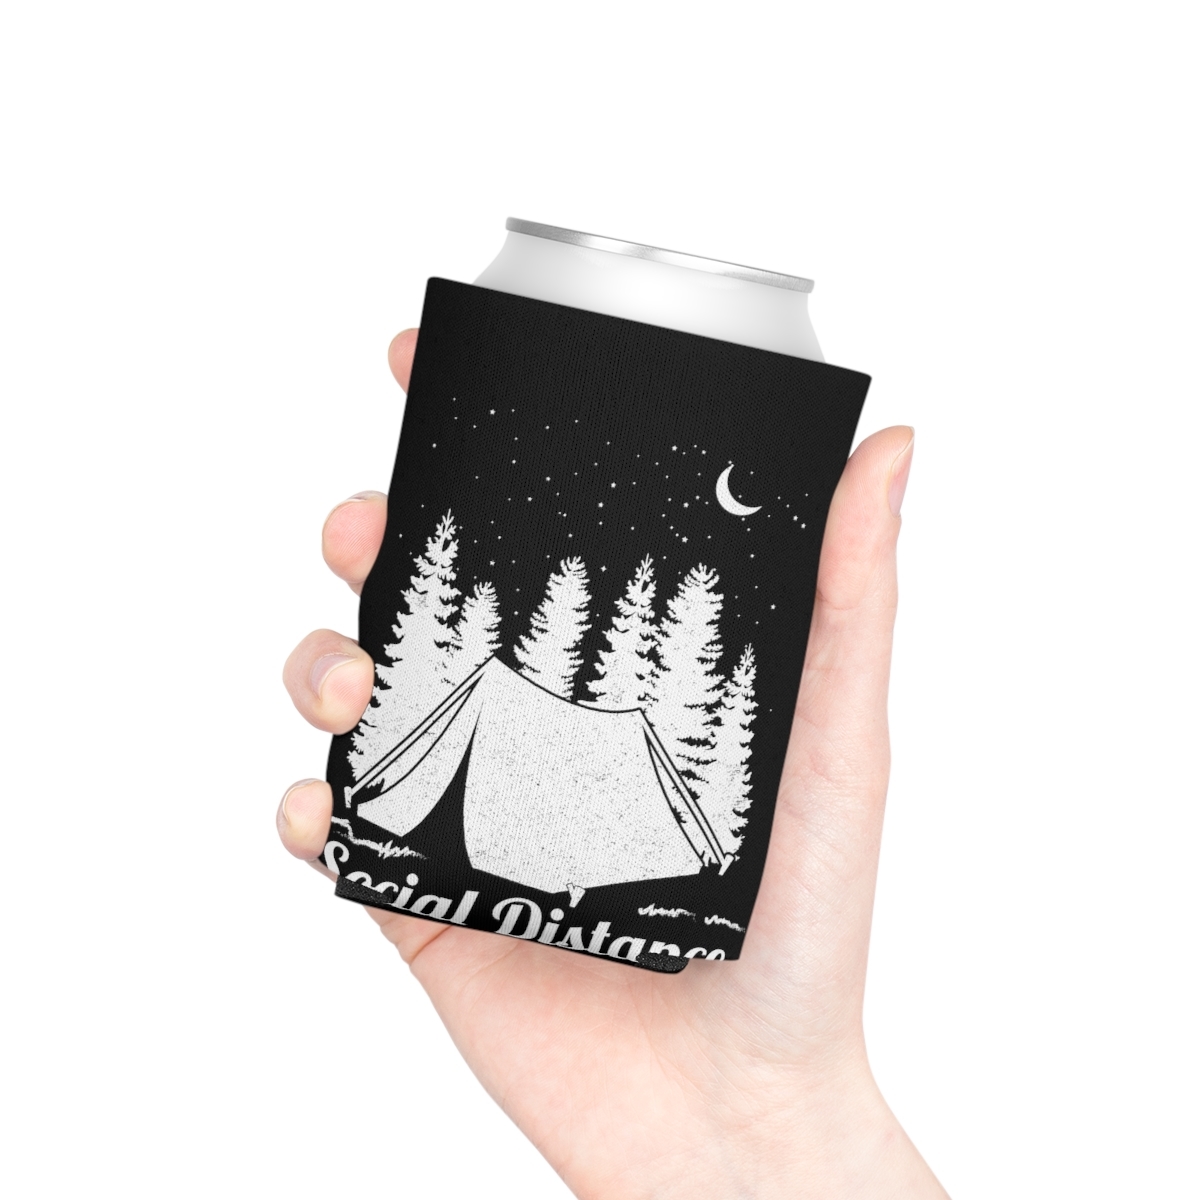 Keep Your Cans Crisp and Cool: Social Distance Printed Can Cooler for Nature Tri - $12.36